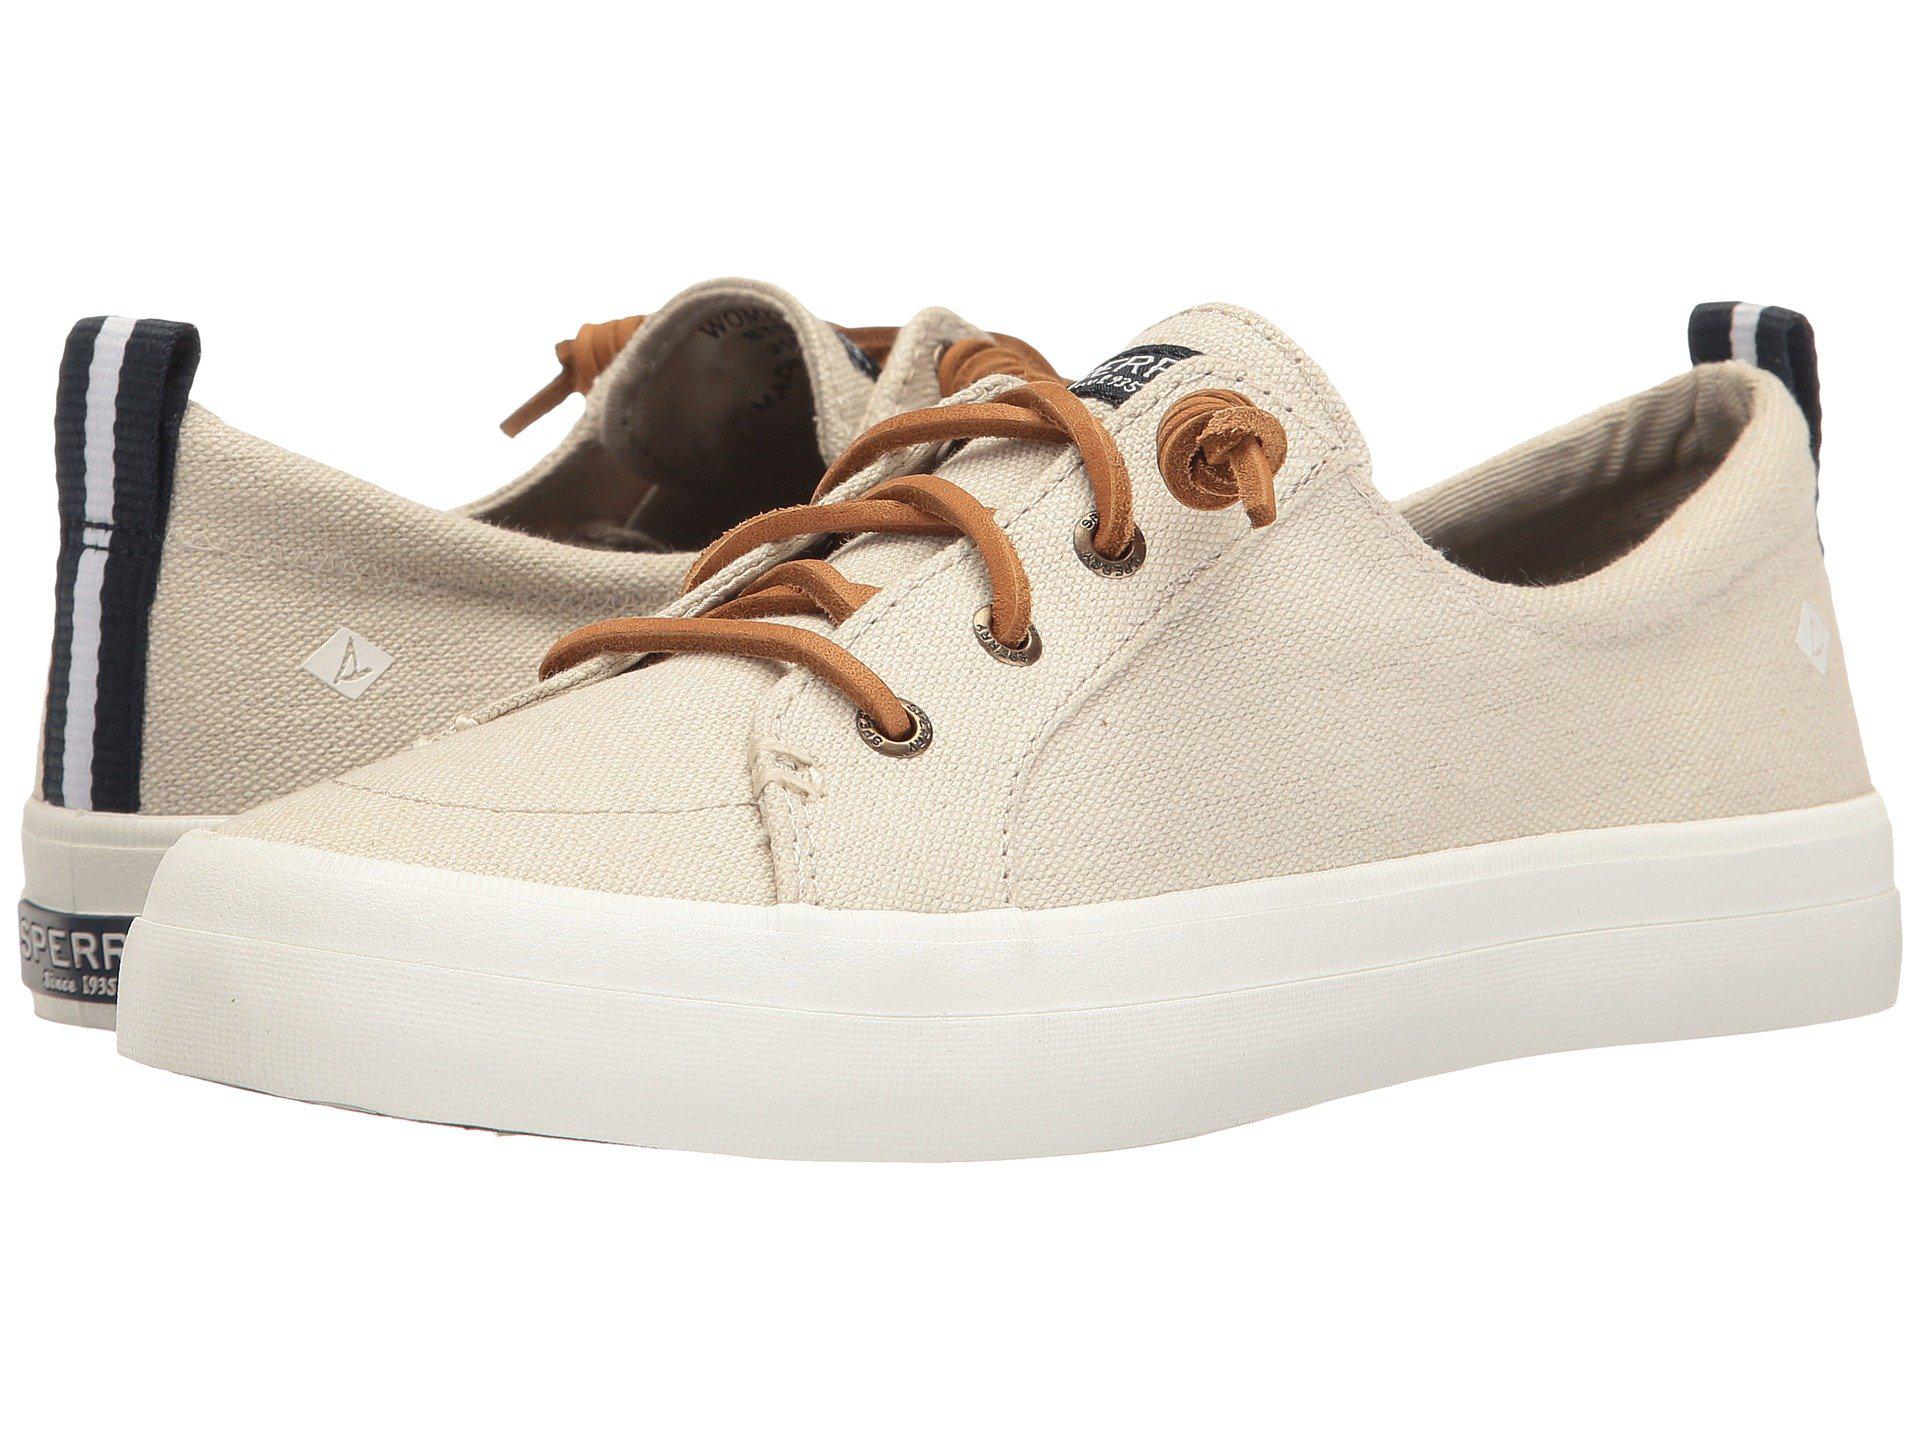 Sperry Top-Sider Crest Vibe Washed 